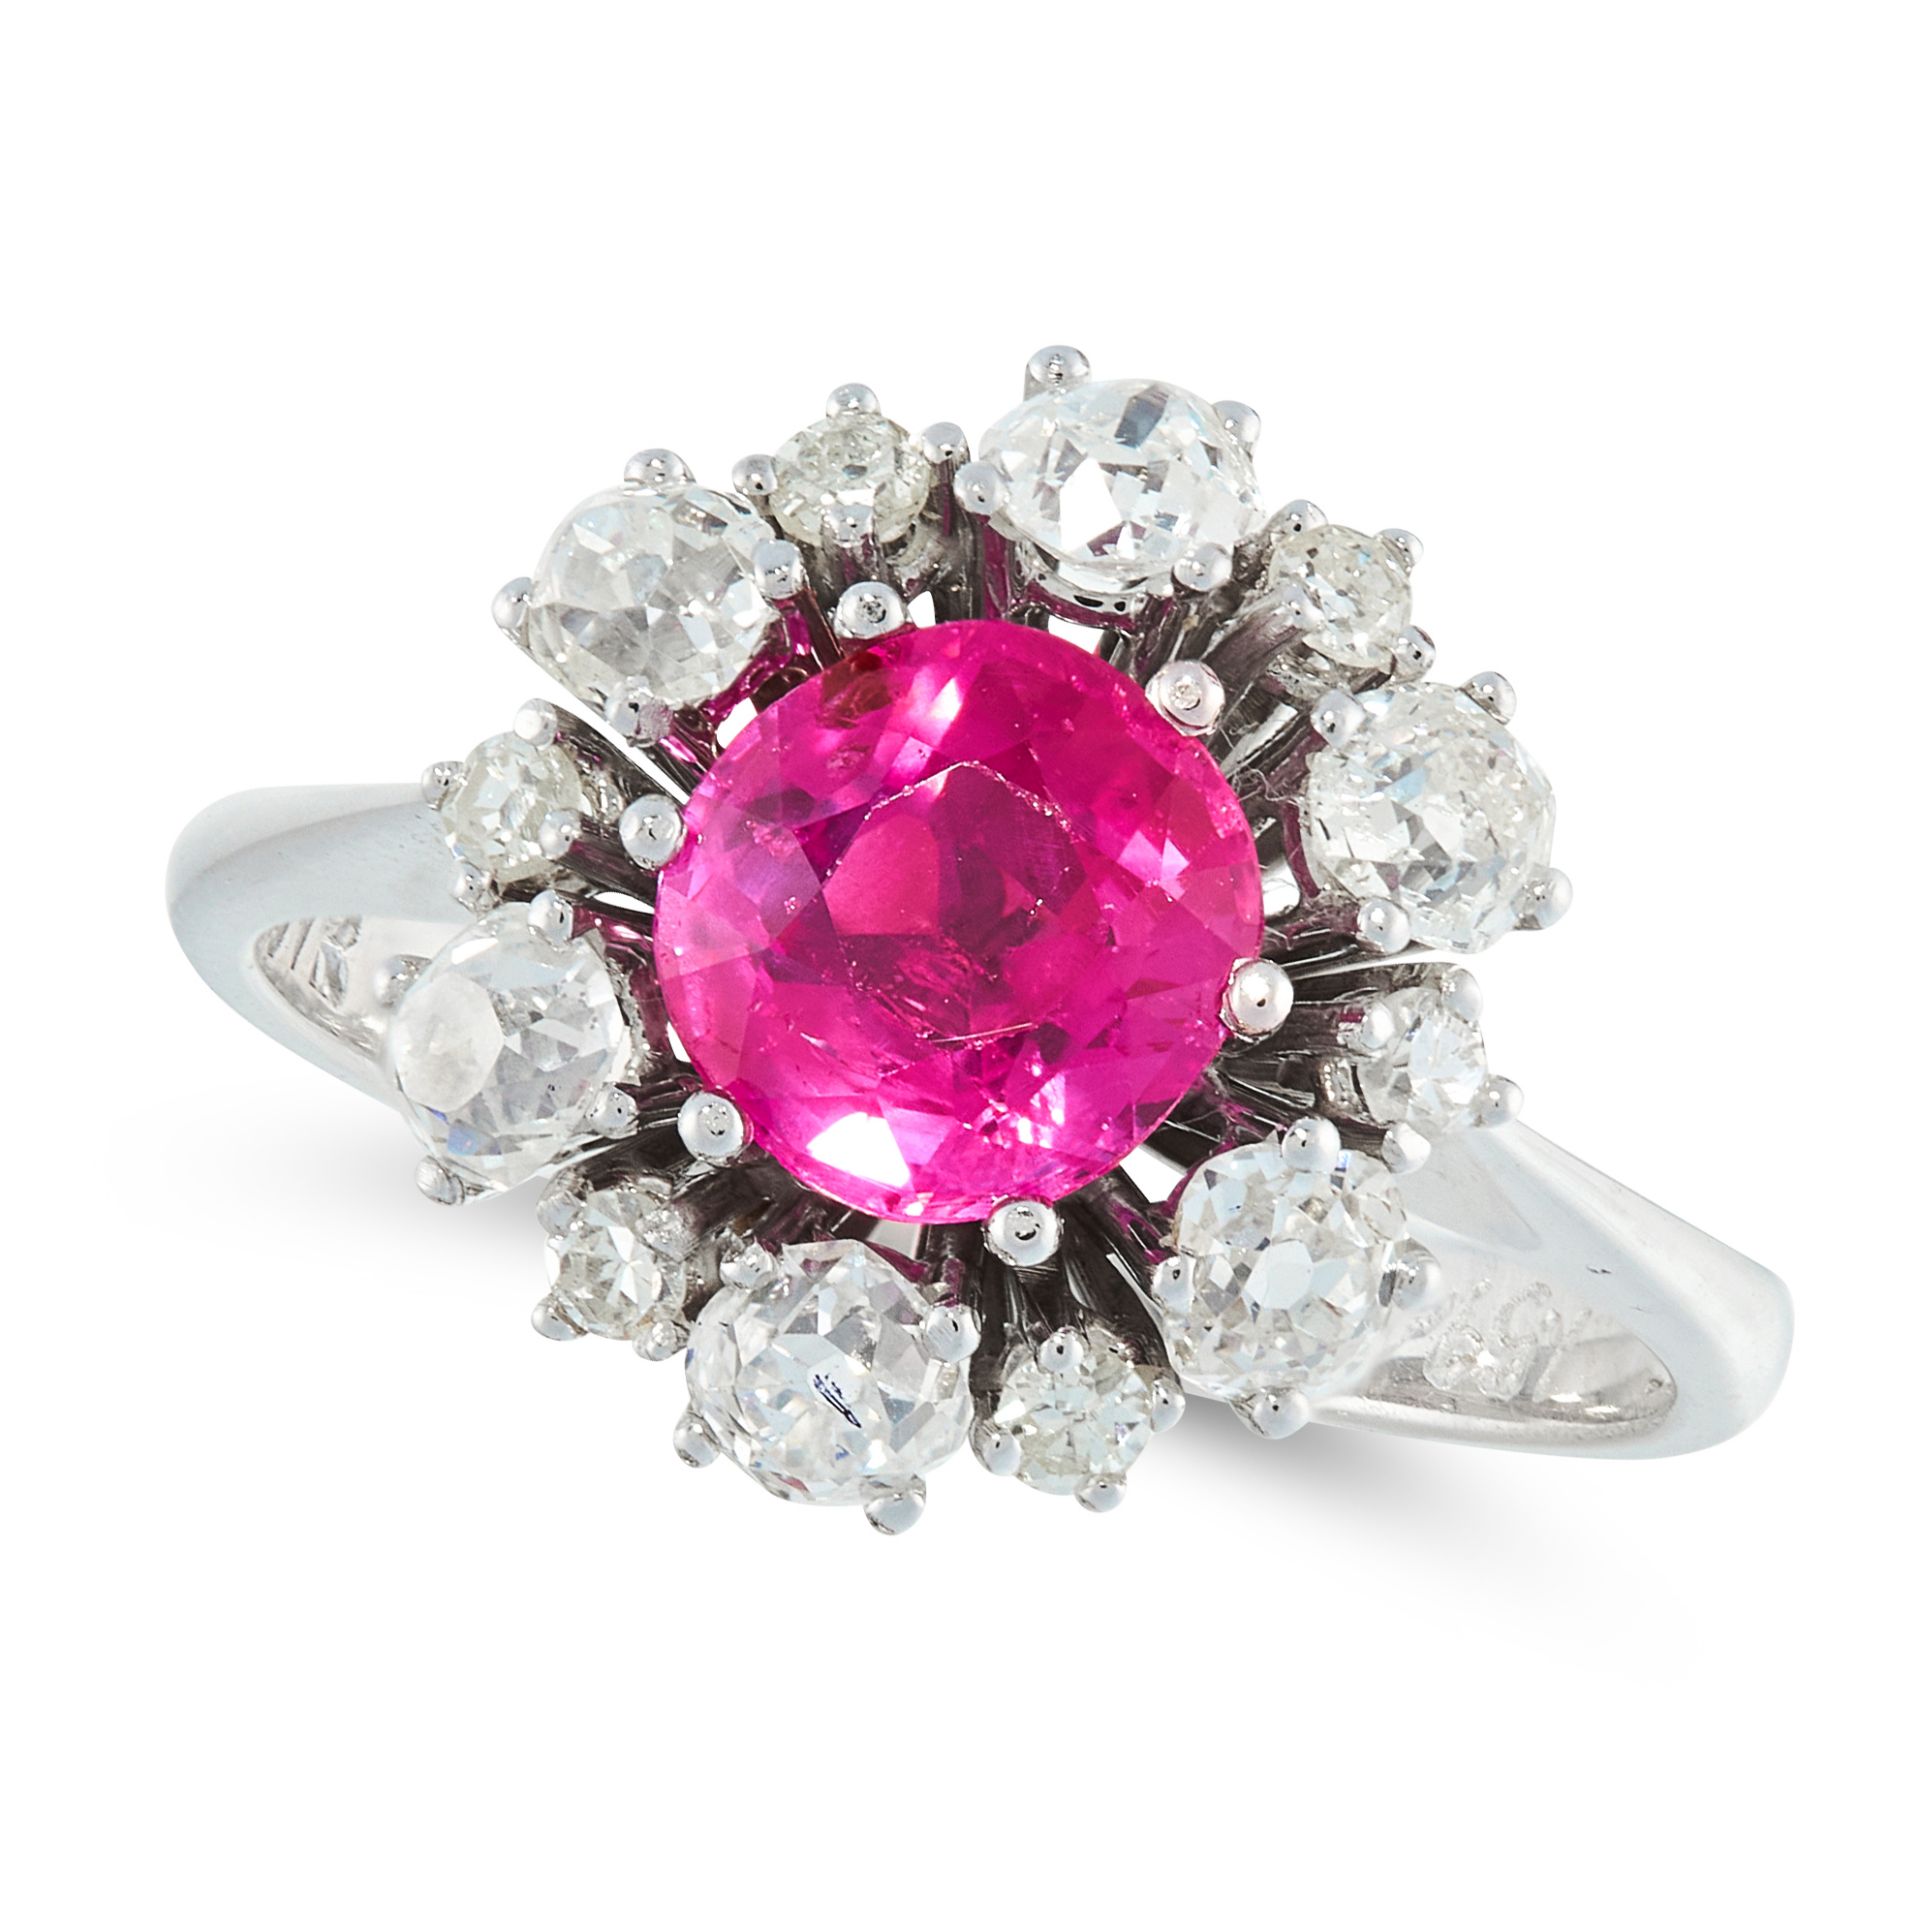 A BURMA NO HEAT PINK SAPPHIRE AND DIAMOND CLUSTER RING in 14ct white gold, set with a cushion cut